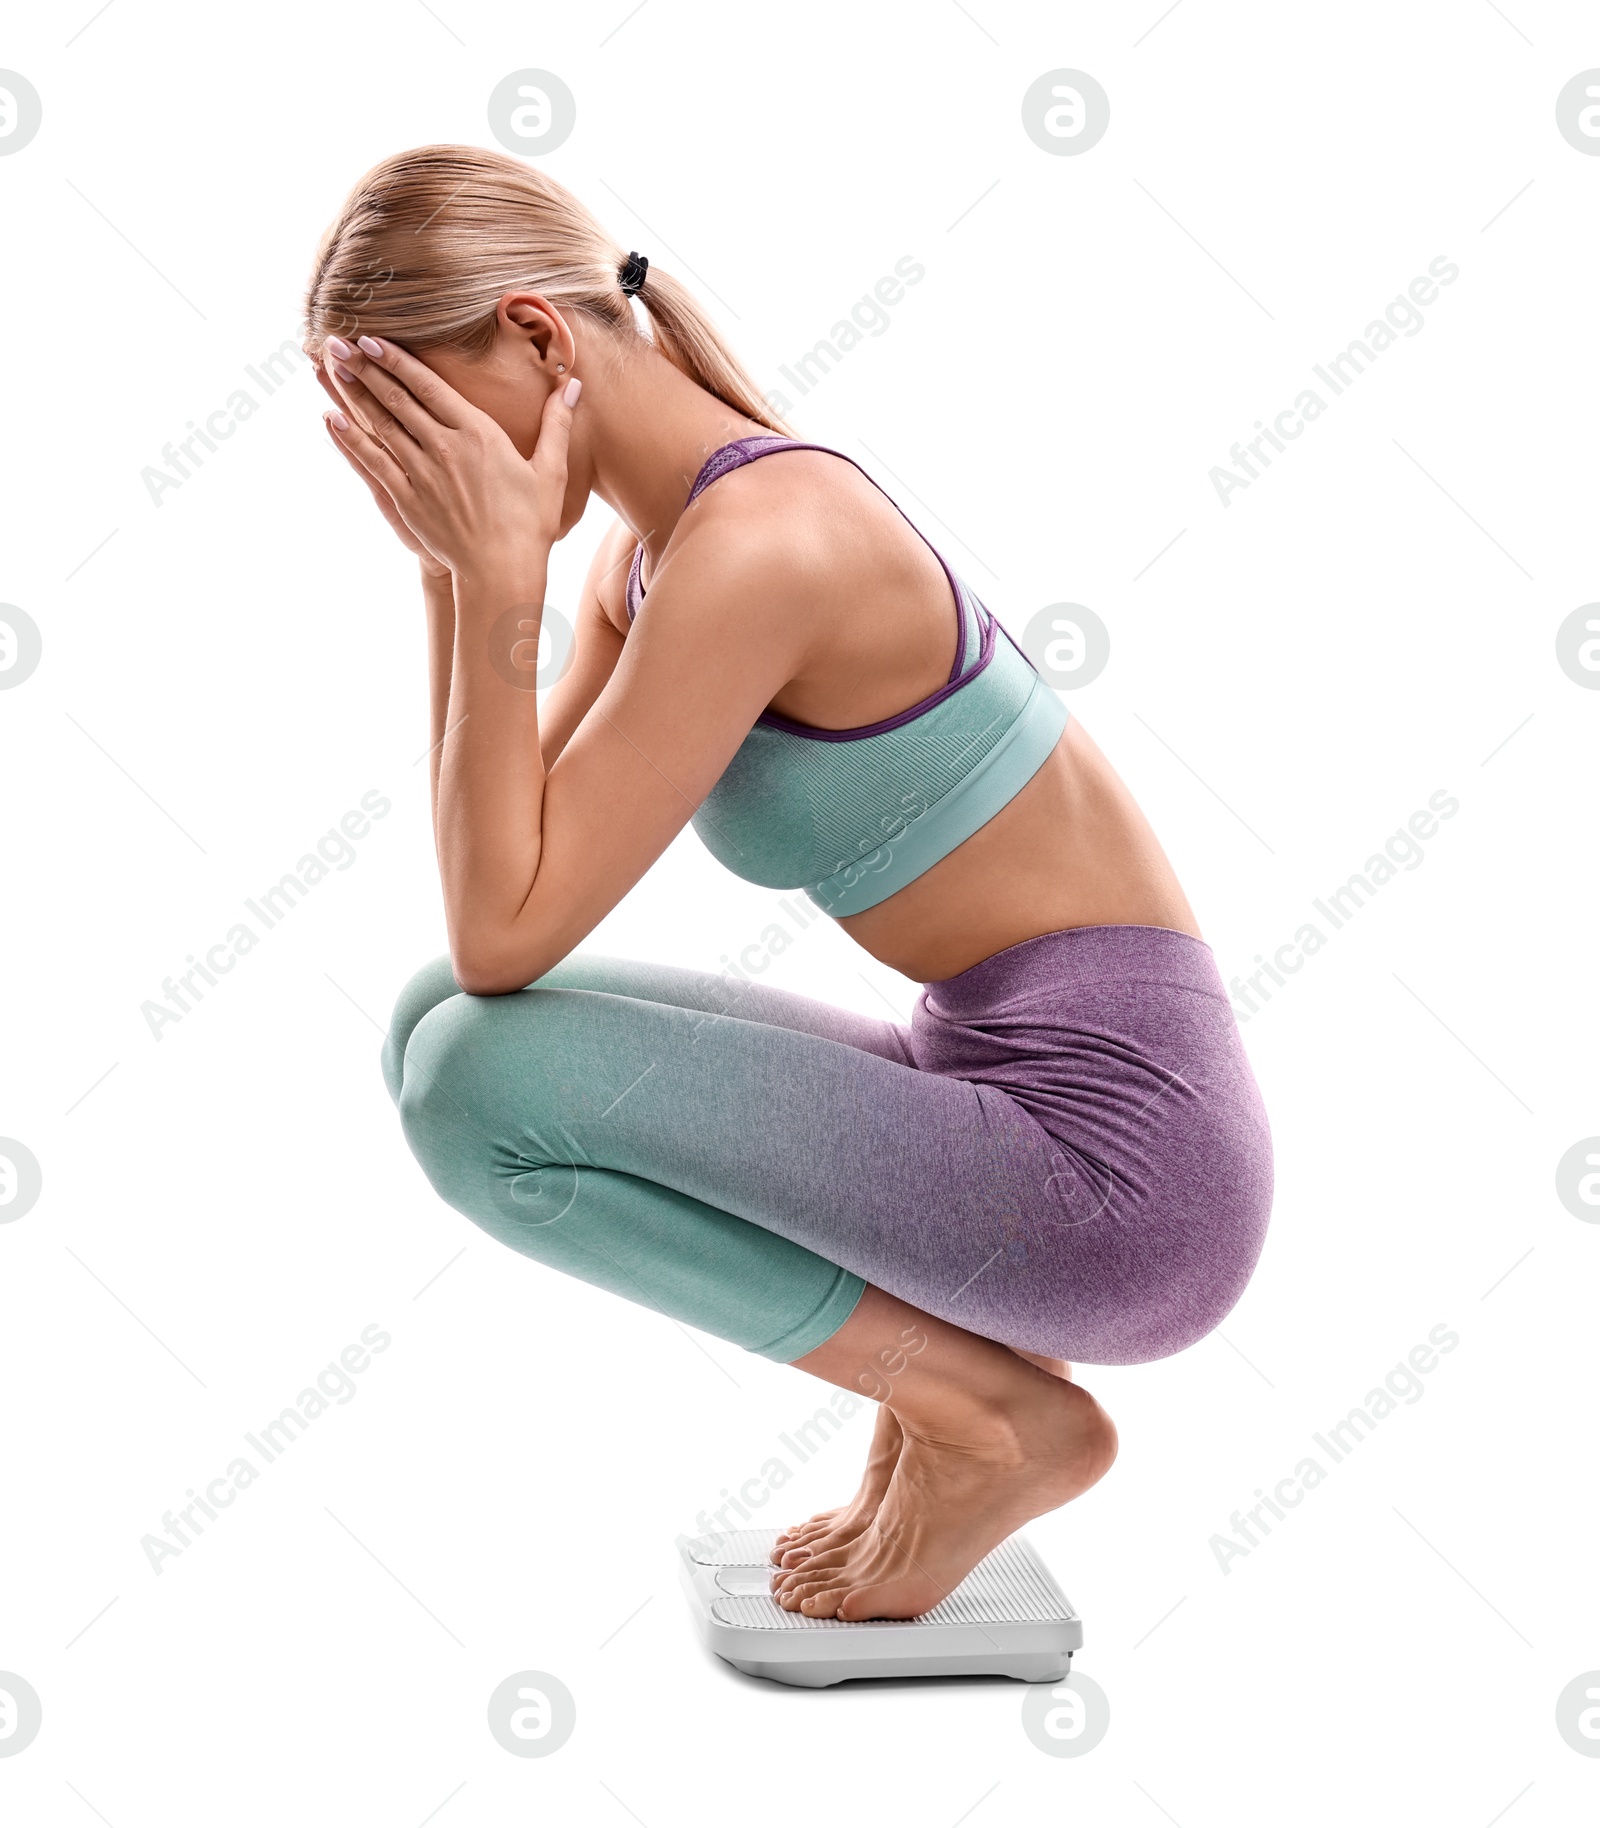 Photo of Upset woman covering face with hands on floor scale against white background